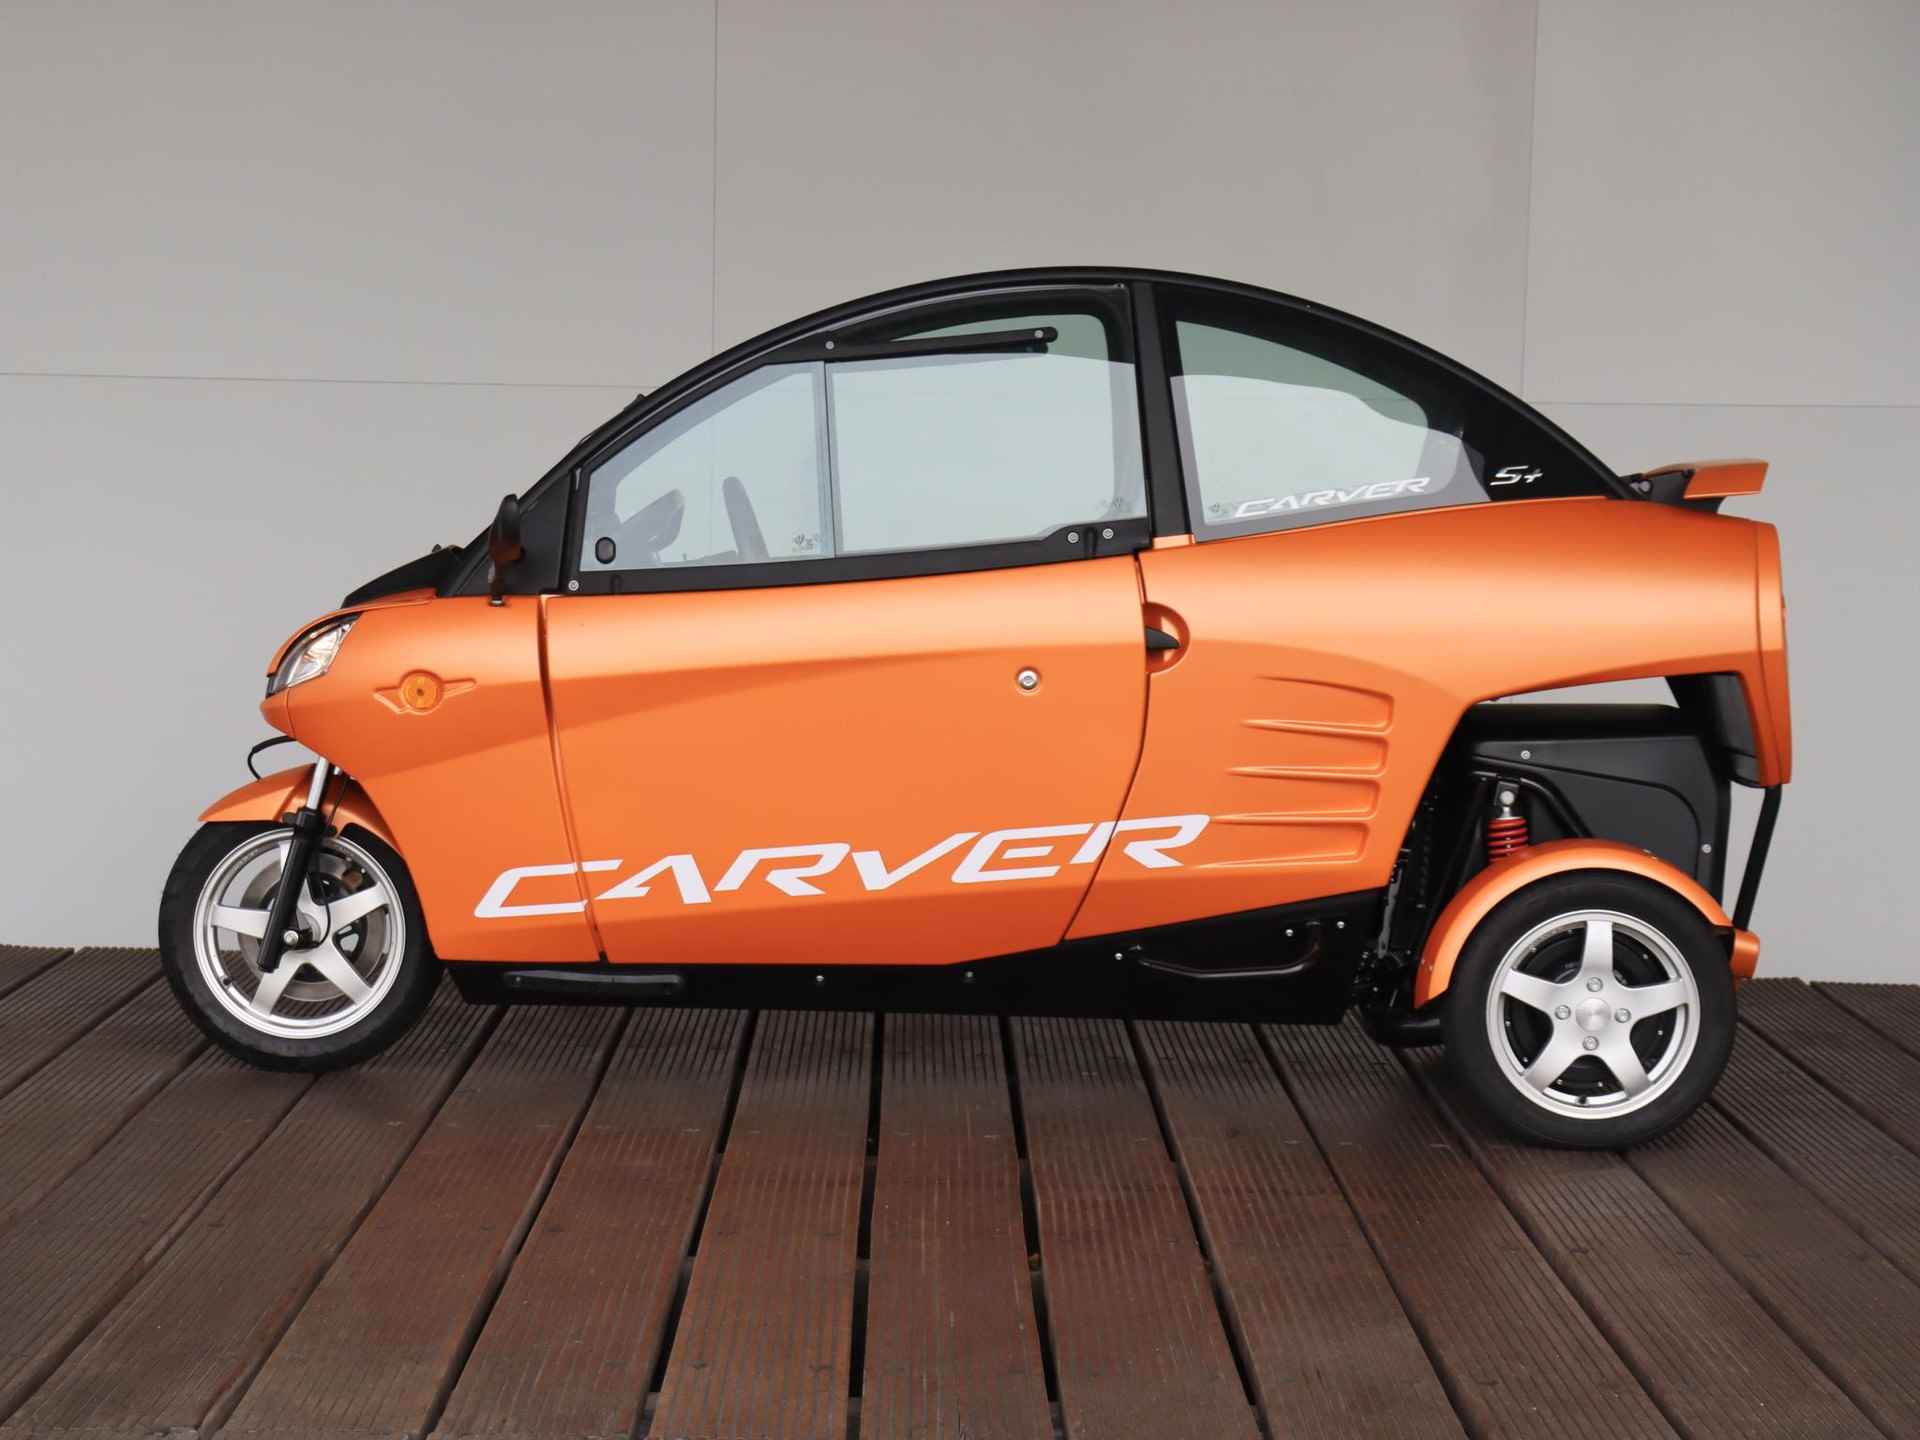 Carver 7.1 kWh S+ | 80 KM | 100% Electric | Bluetooth | Soft top | - 3/23